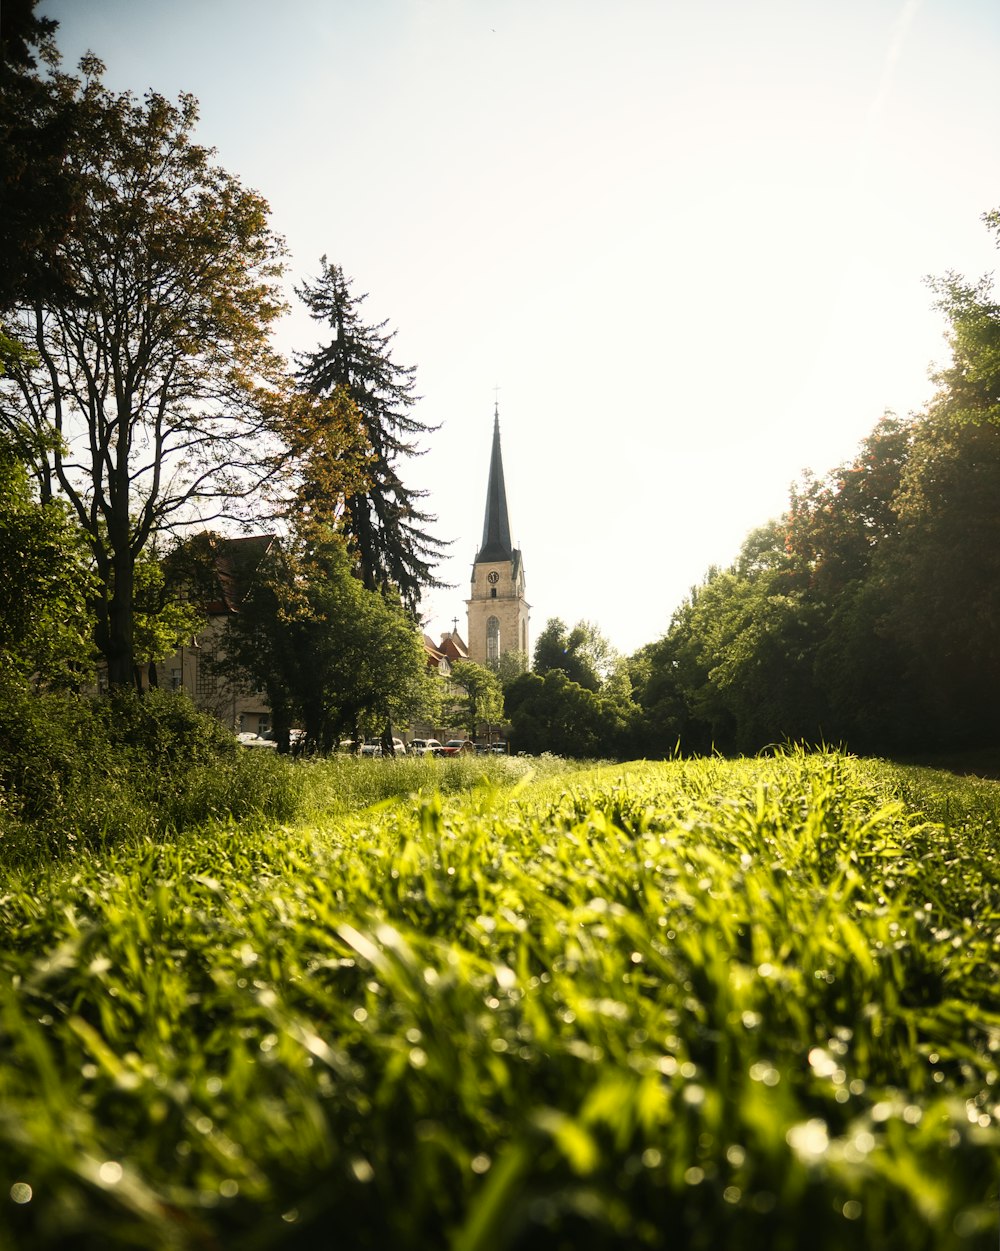 a grassy field with a church steeple in the background